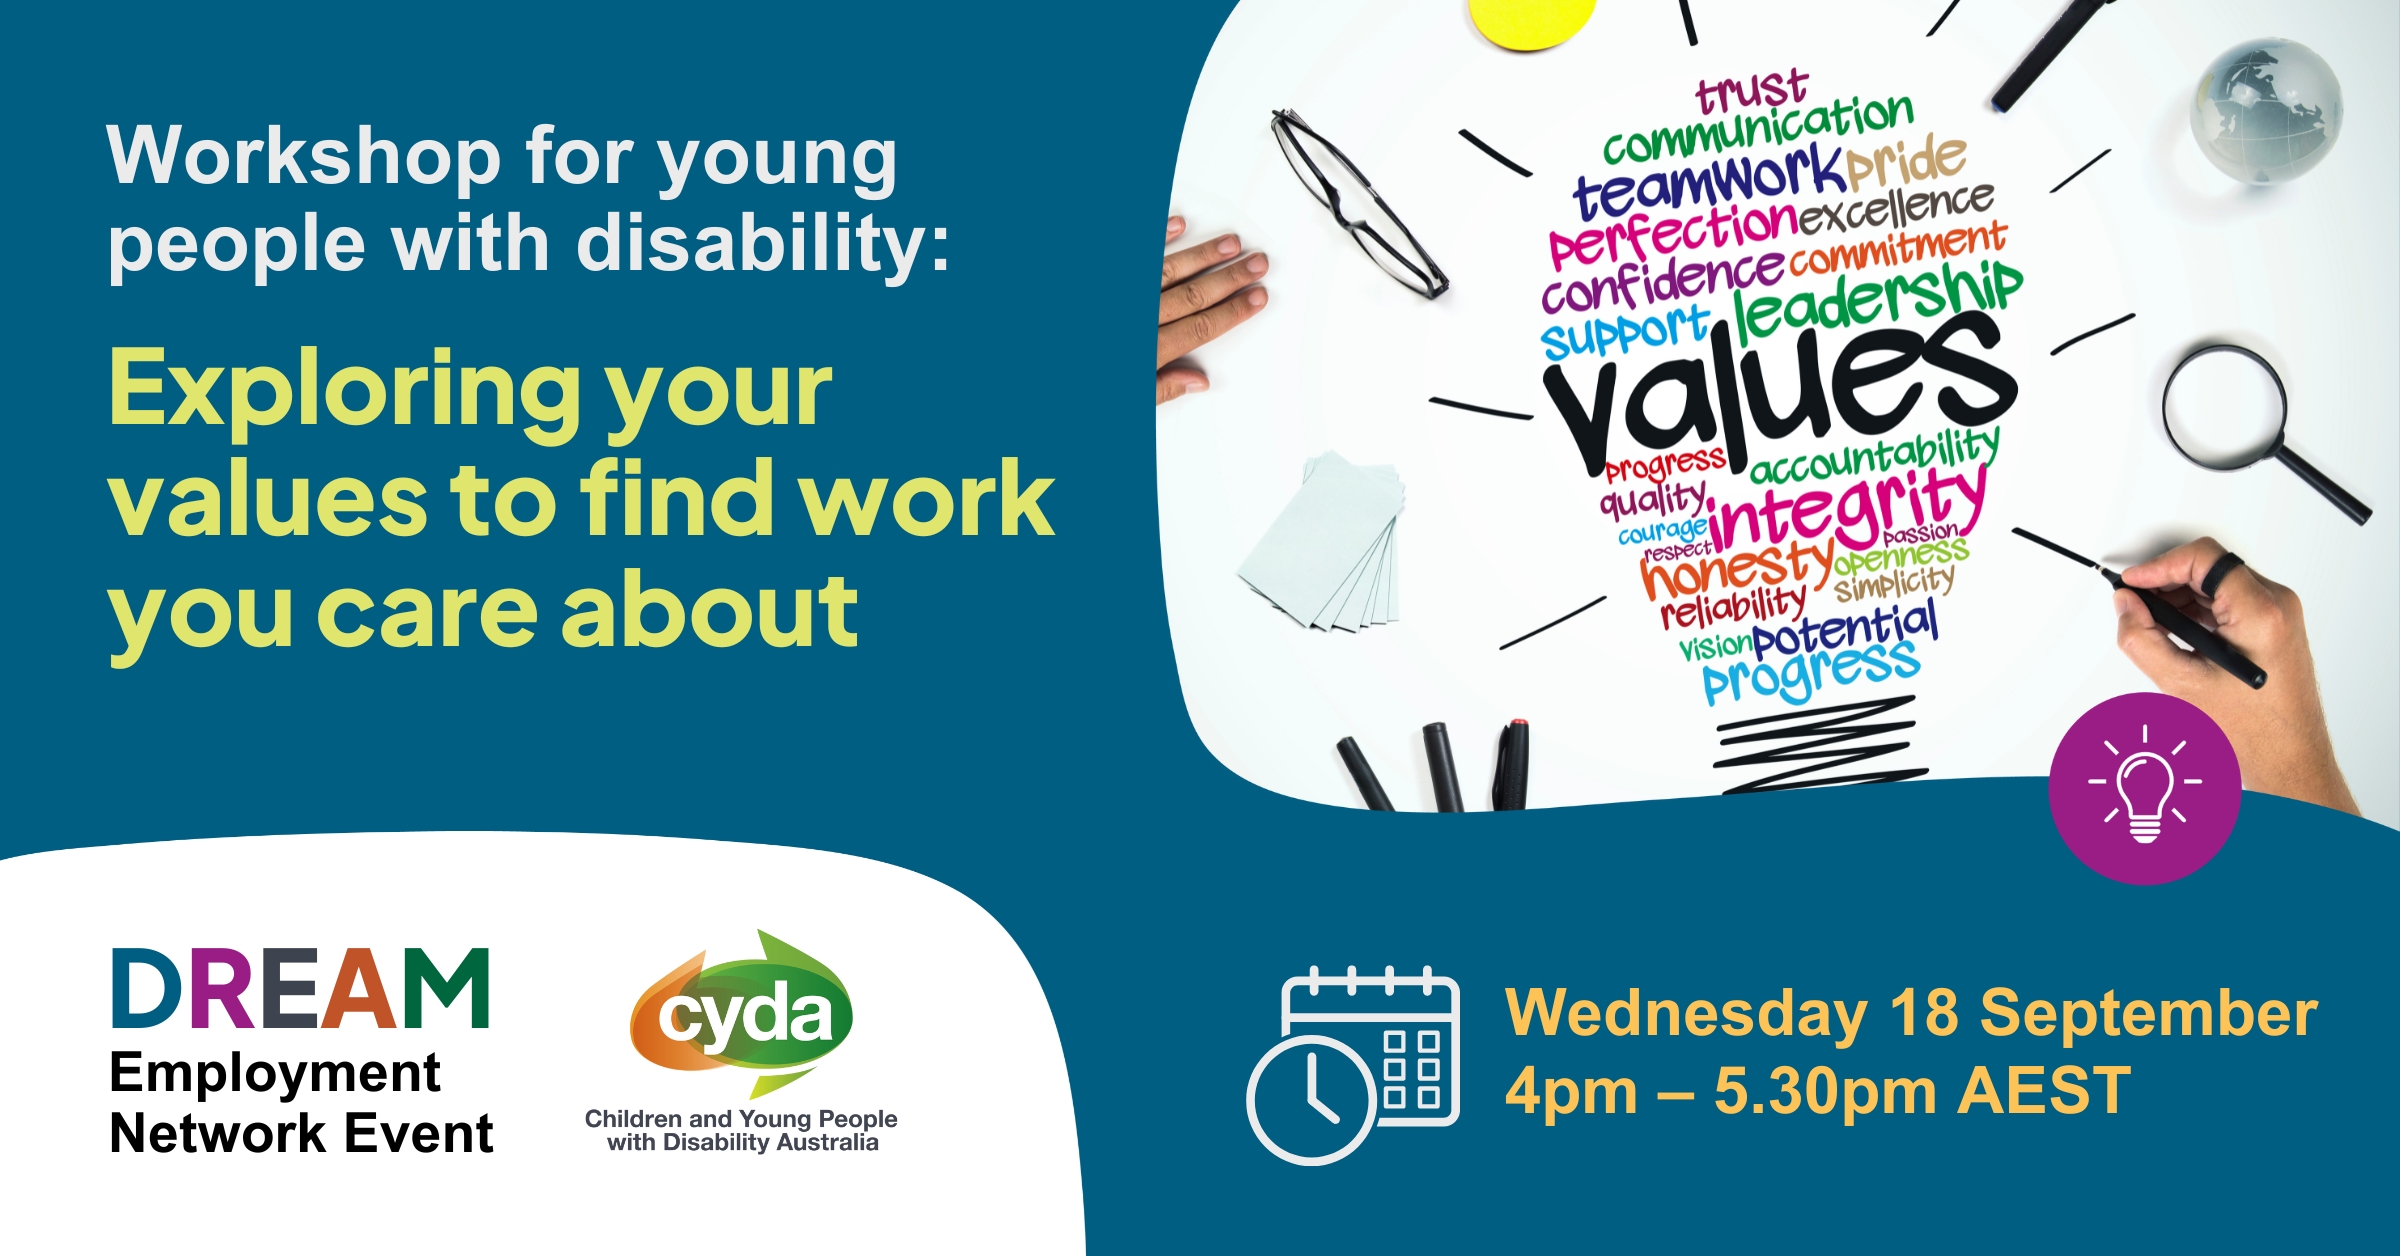 Text reads: Workshop for young people with disability Exploring you values to find work you care about. Wednesday 18 September, 4pm-5.30pm AEST. The DREAM Employment Network event logo, and the logo for Children and Young People with Disability Australia both sit to the left. To the right is a photograph of a hand drawing a colourful word map of different values in the shape of a lightbulb. Some of the values are “integrity”, “progress”, leadership” and “trust”. Around the word map are a pair of glasses, pens, a magnifying glass, speaking cards and a glass ball.